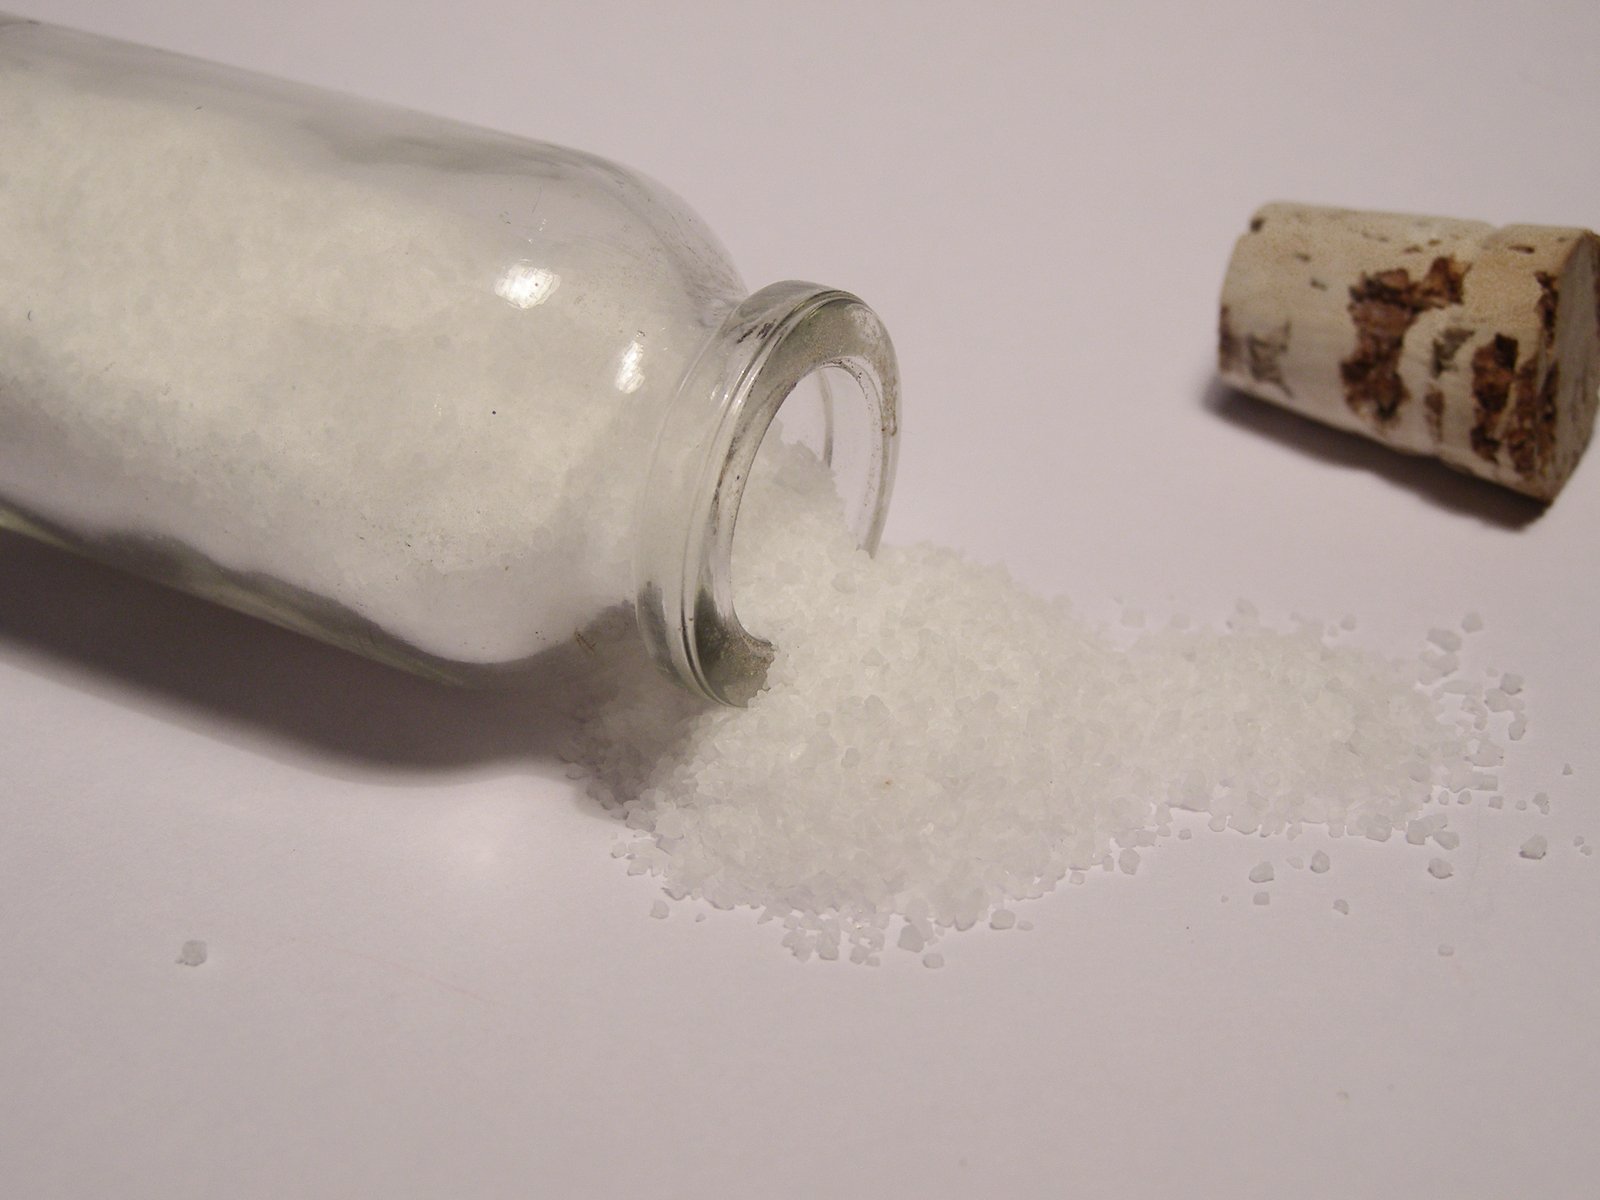 a pile of rice spilled into a bottle next to a cork lid